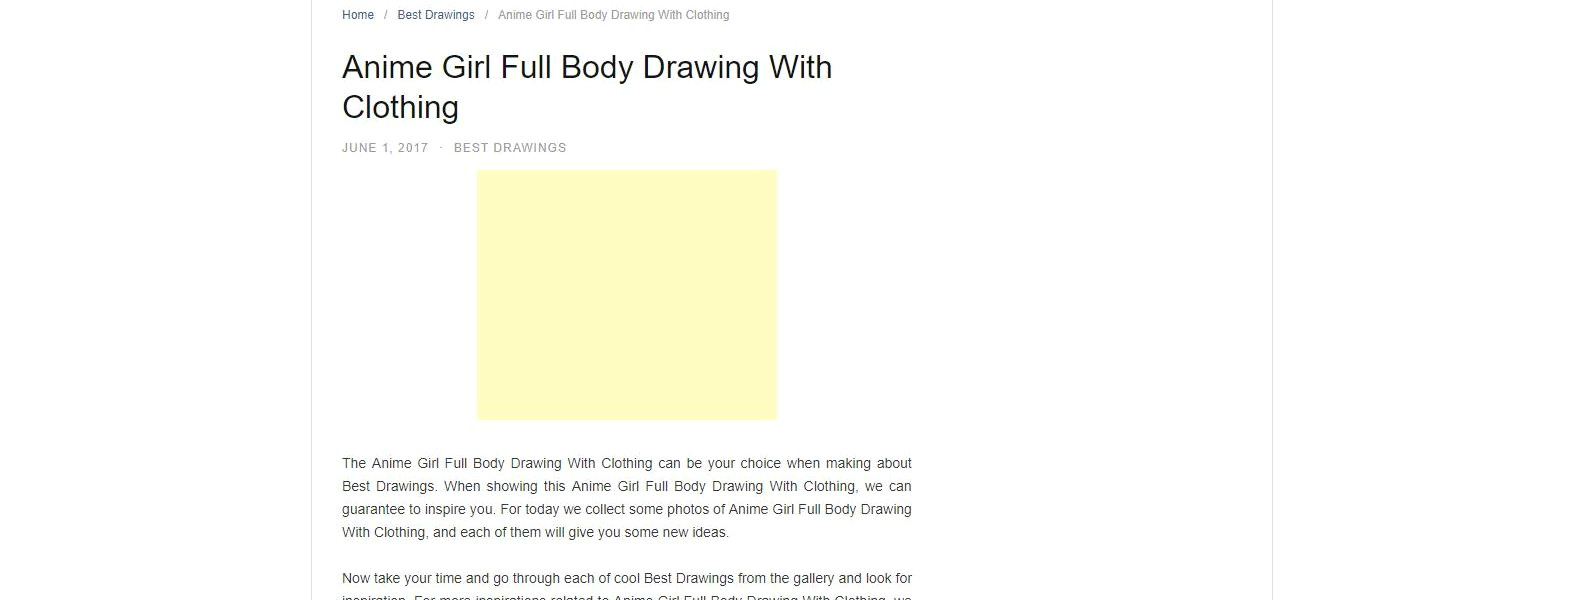 How to Draw Female Body Anime Anime Girl Full Body Drawing with Clothing Great Drawing